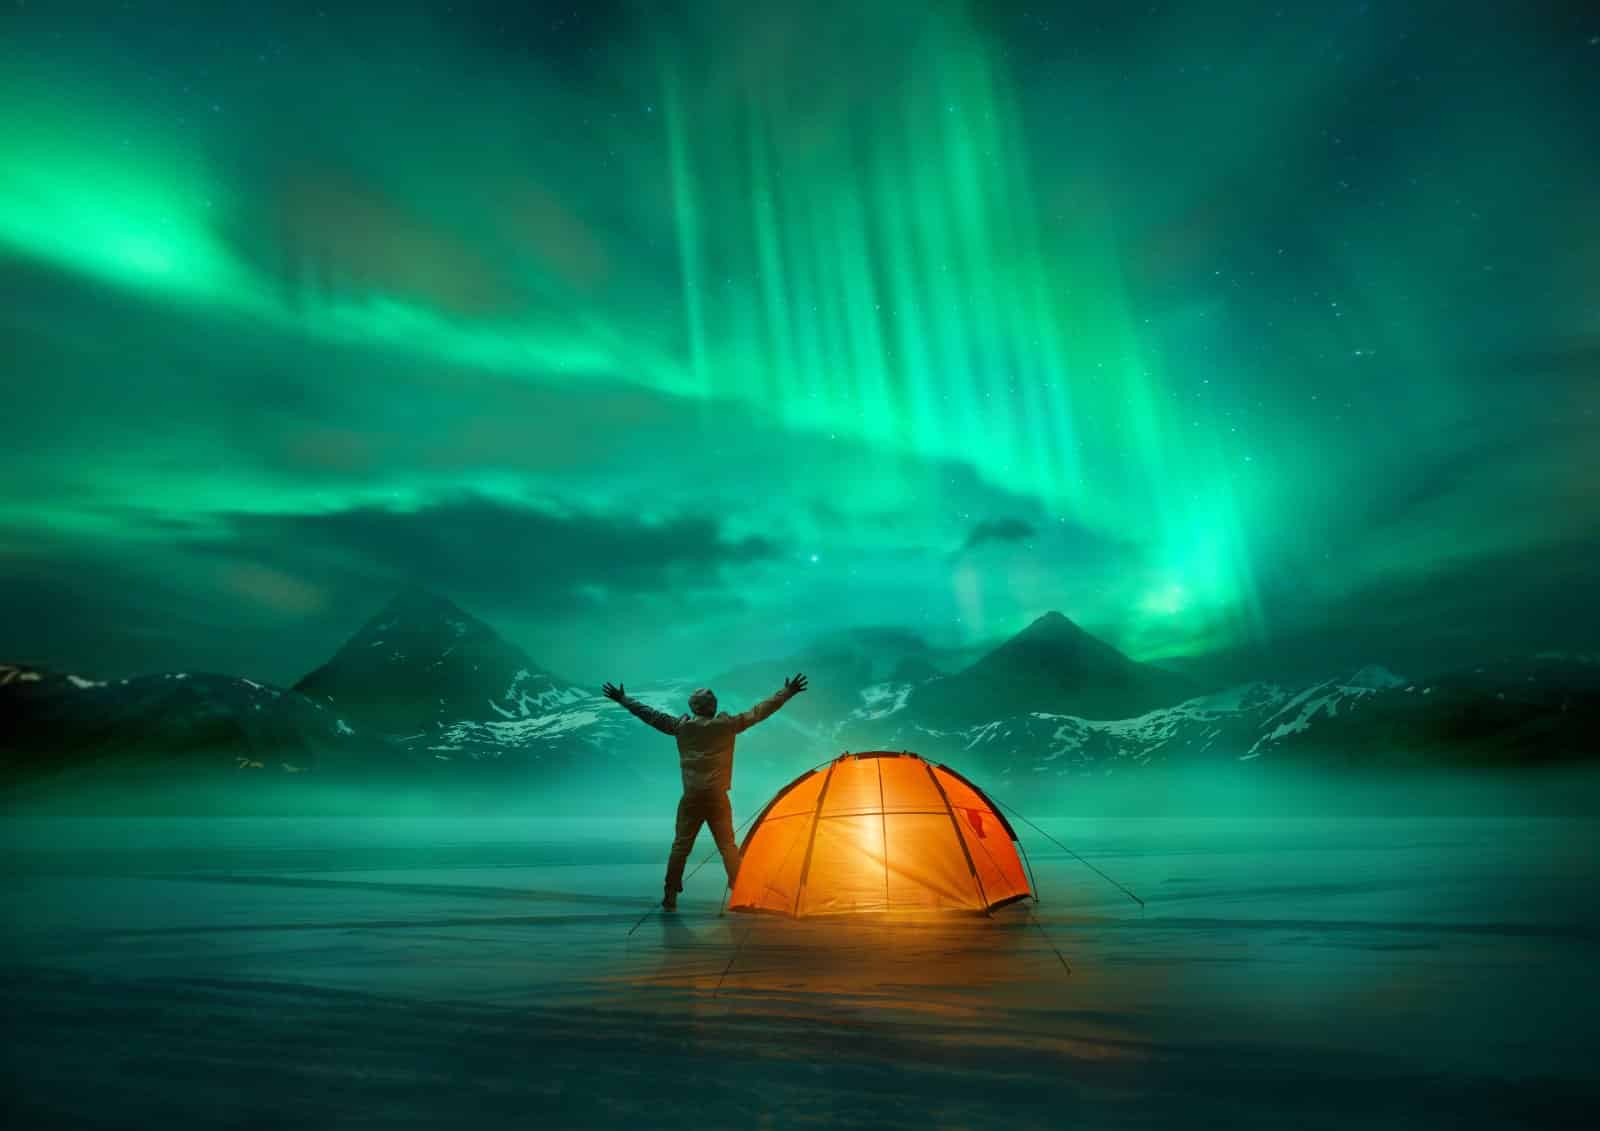 <p class="wp-caption-text">Image Credit: Shutterstock / solarseven</p>  <p><span>The Northern Lights, or Aurora Borealis, are one of nature’s most spectacular displays, and Iceland offers some of the best viewing opportunities in the world. This natural phenomenon occurs when solar particles interact with the Earth’s magnetic field, creating vibrant colors that dance across the night sky. The experience of watching the Northern Lights in Iceland’s vast, unspoiled landscapes is truly unforgettable.</span></p>